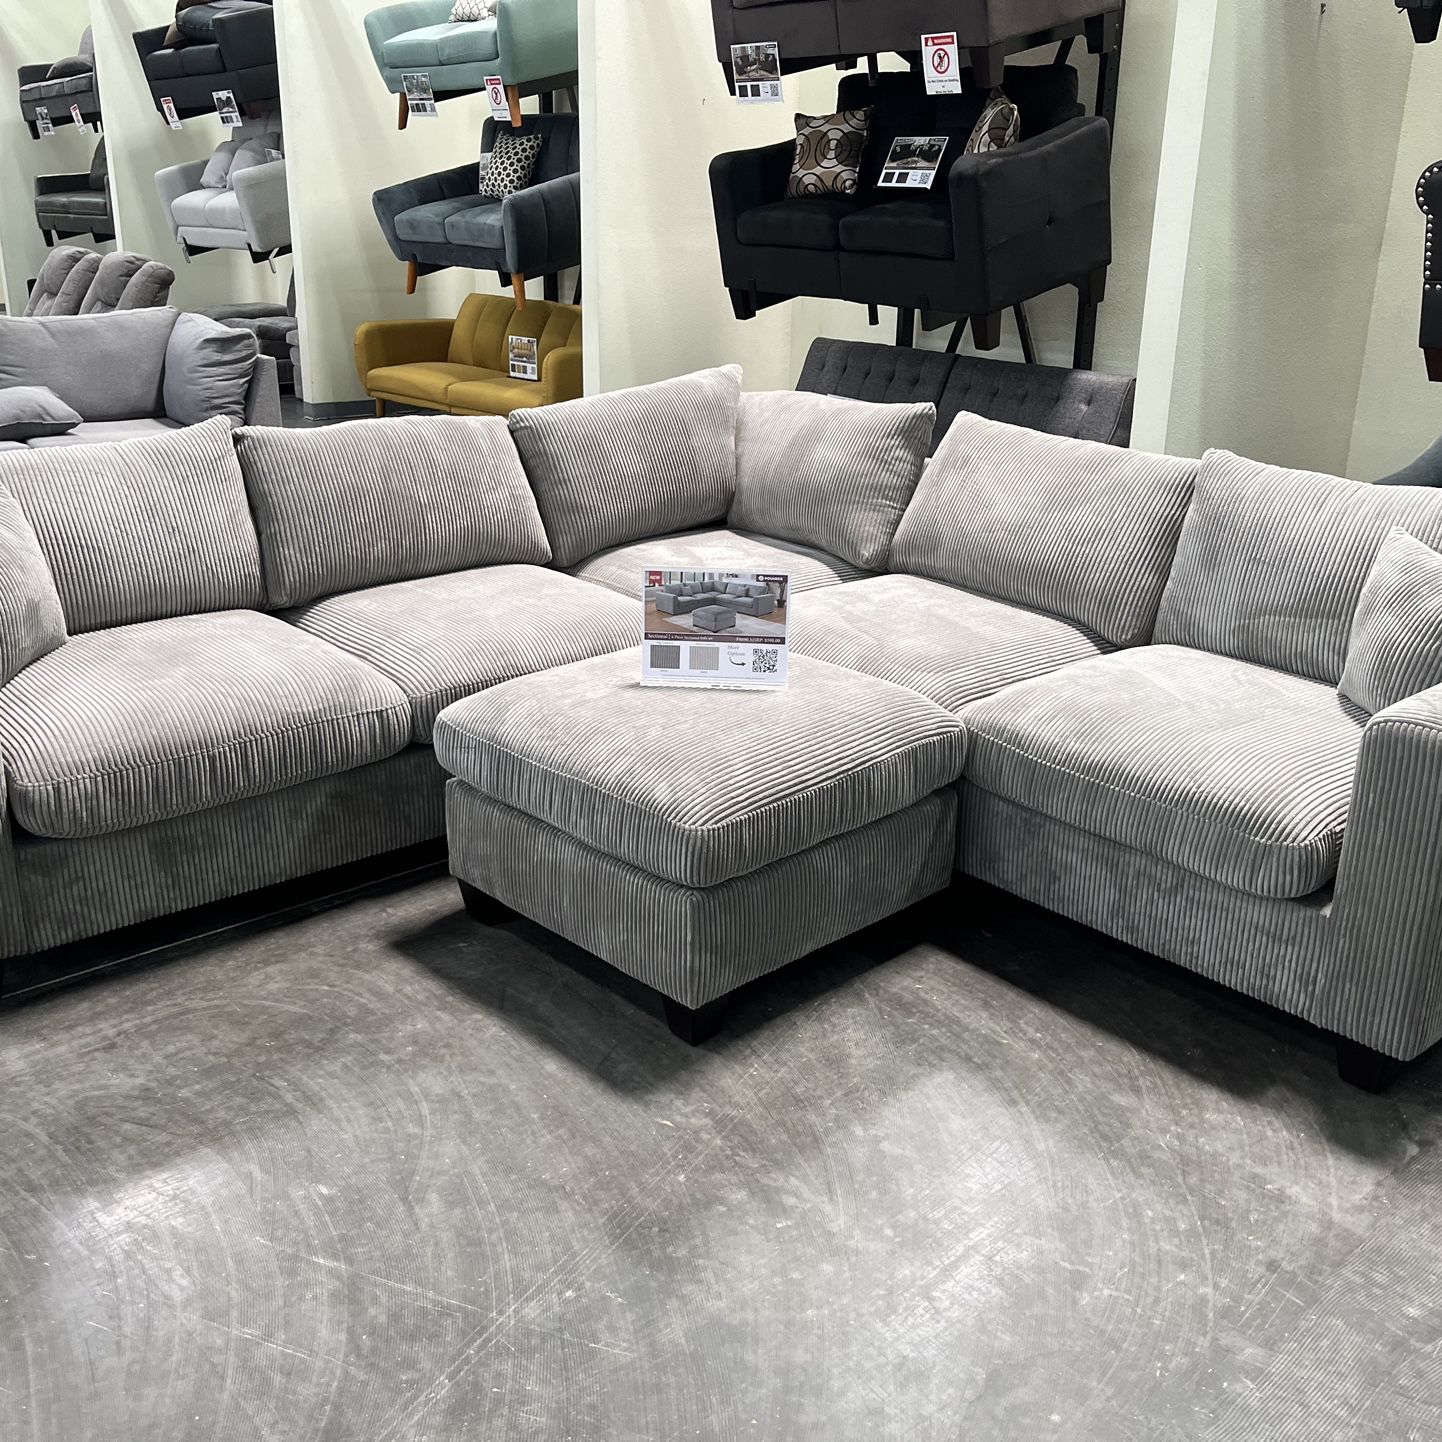 Brand New Sectional $550